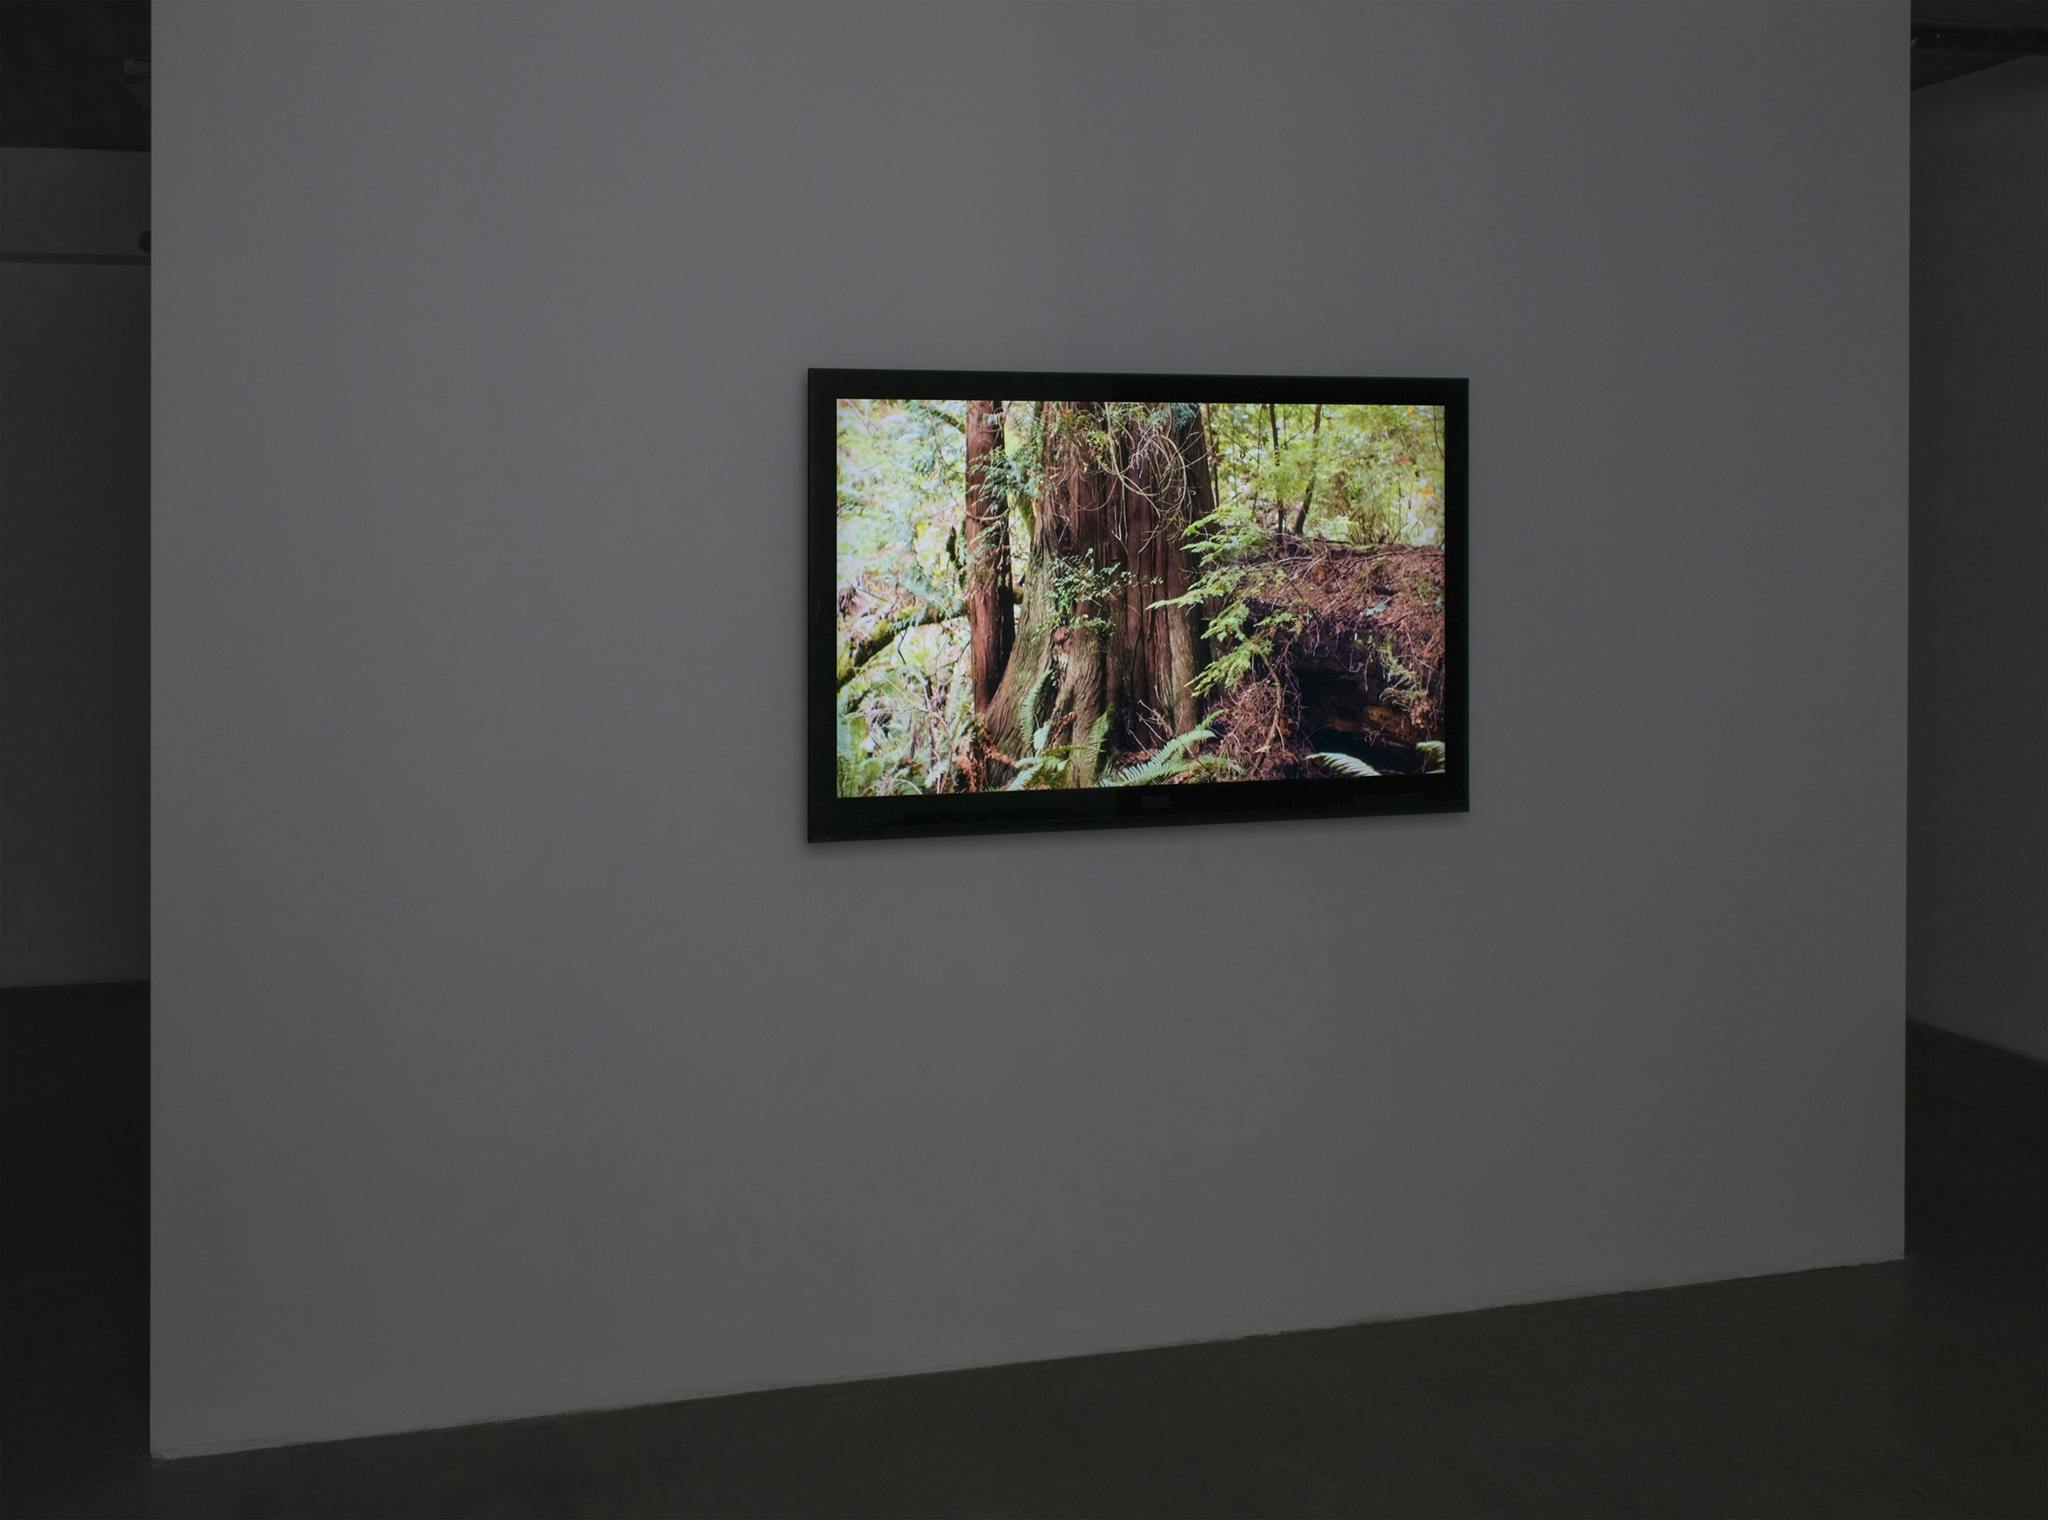 A monitor hangs on the wall of a dark gallery space. The monitor displays an image of a lush forest in British Columbia.